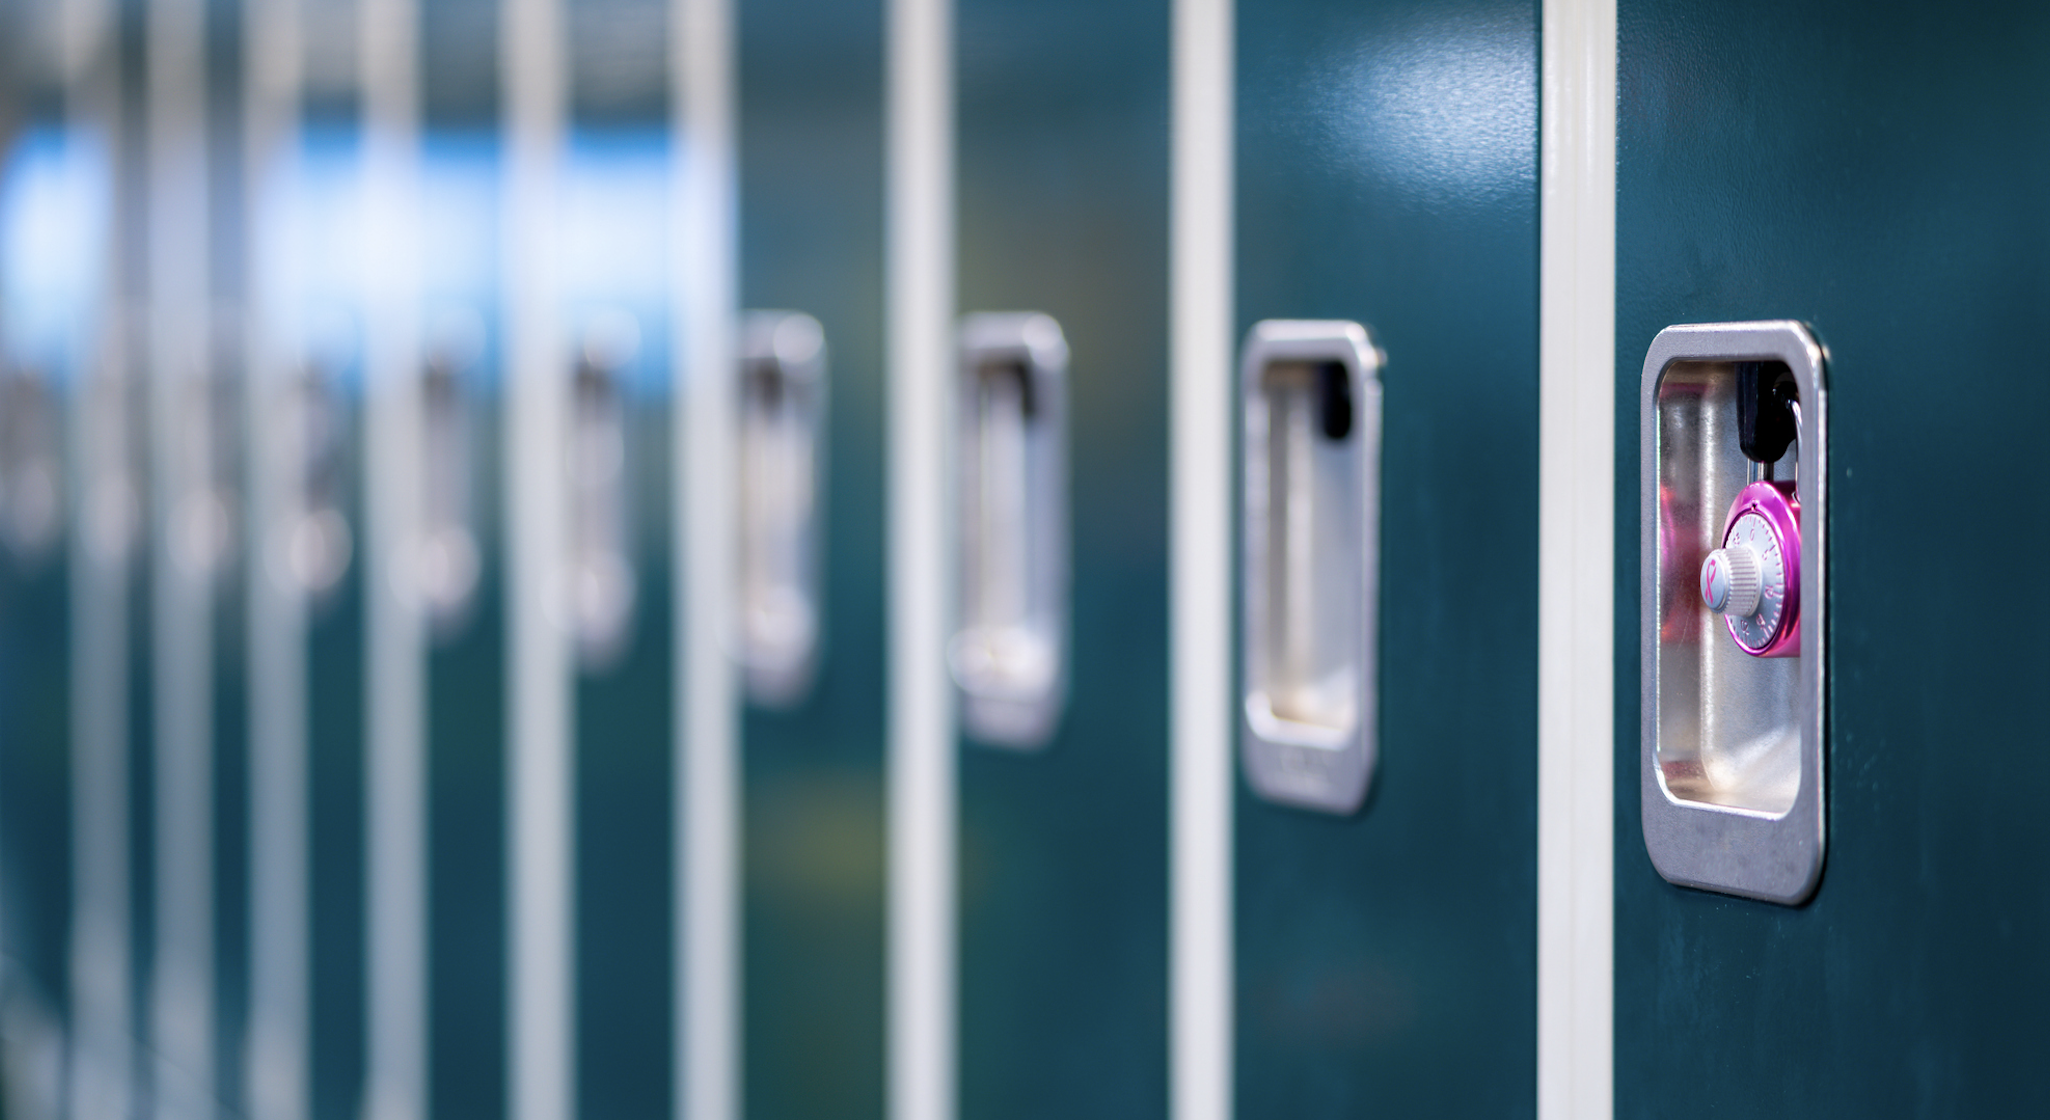 Blog featured image. Photo of a row of school lockers, one padlocked.